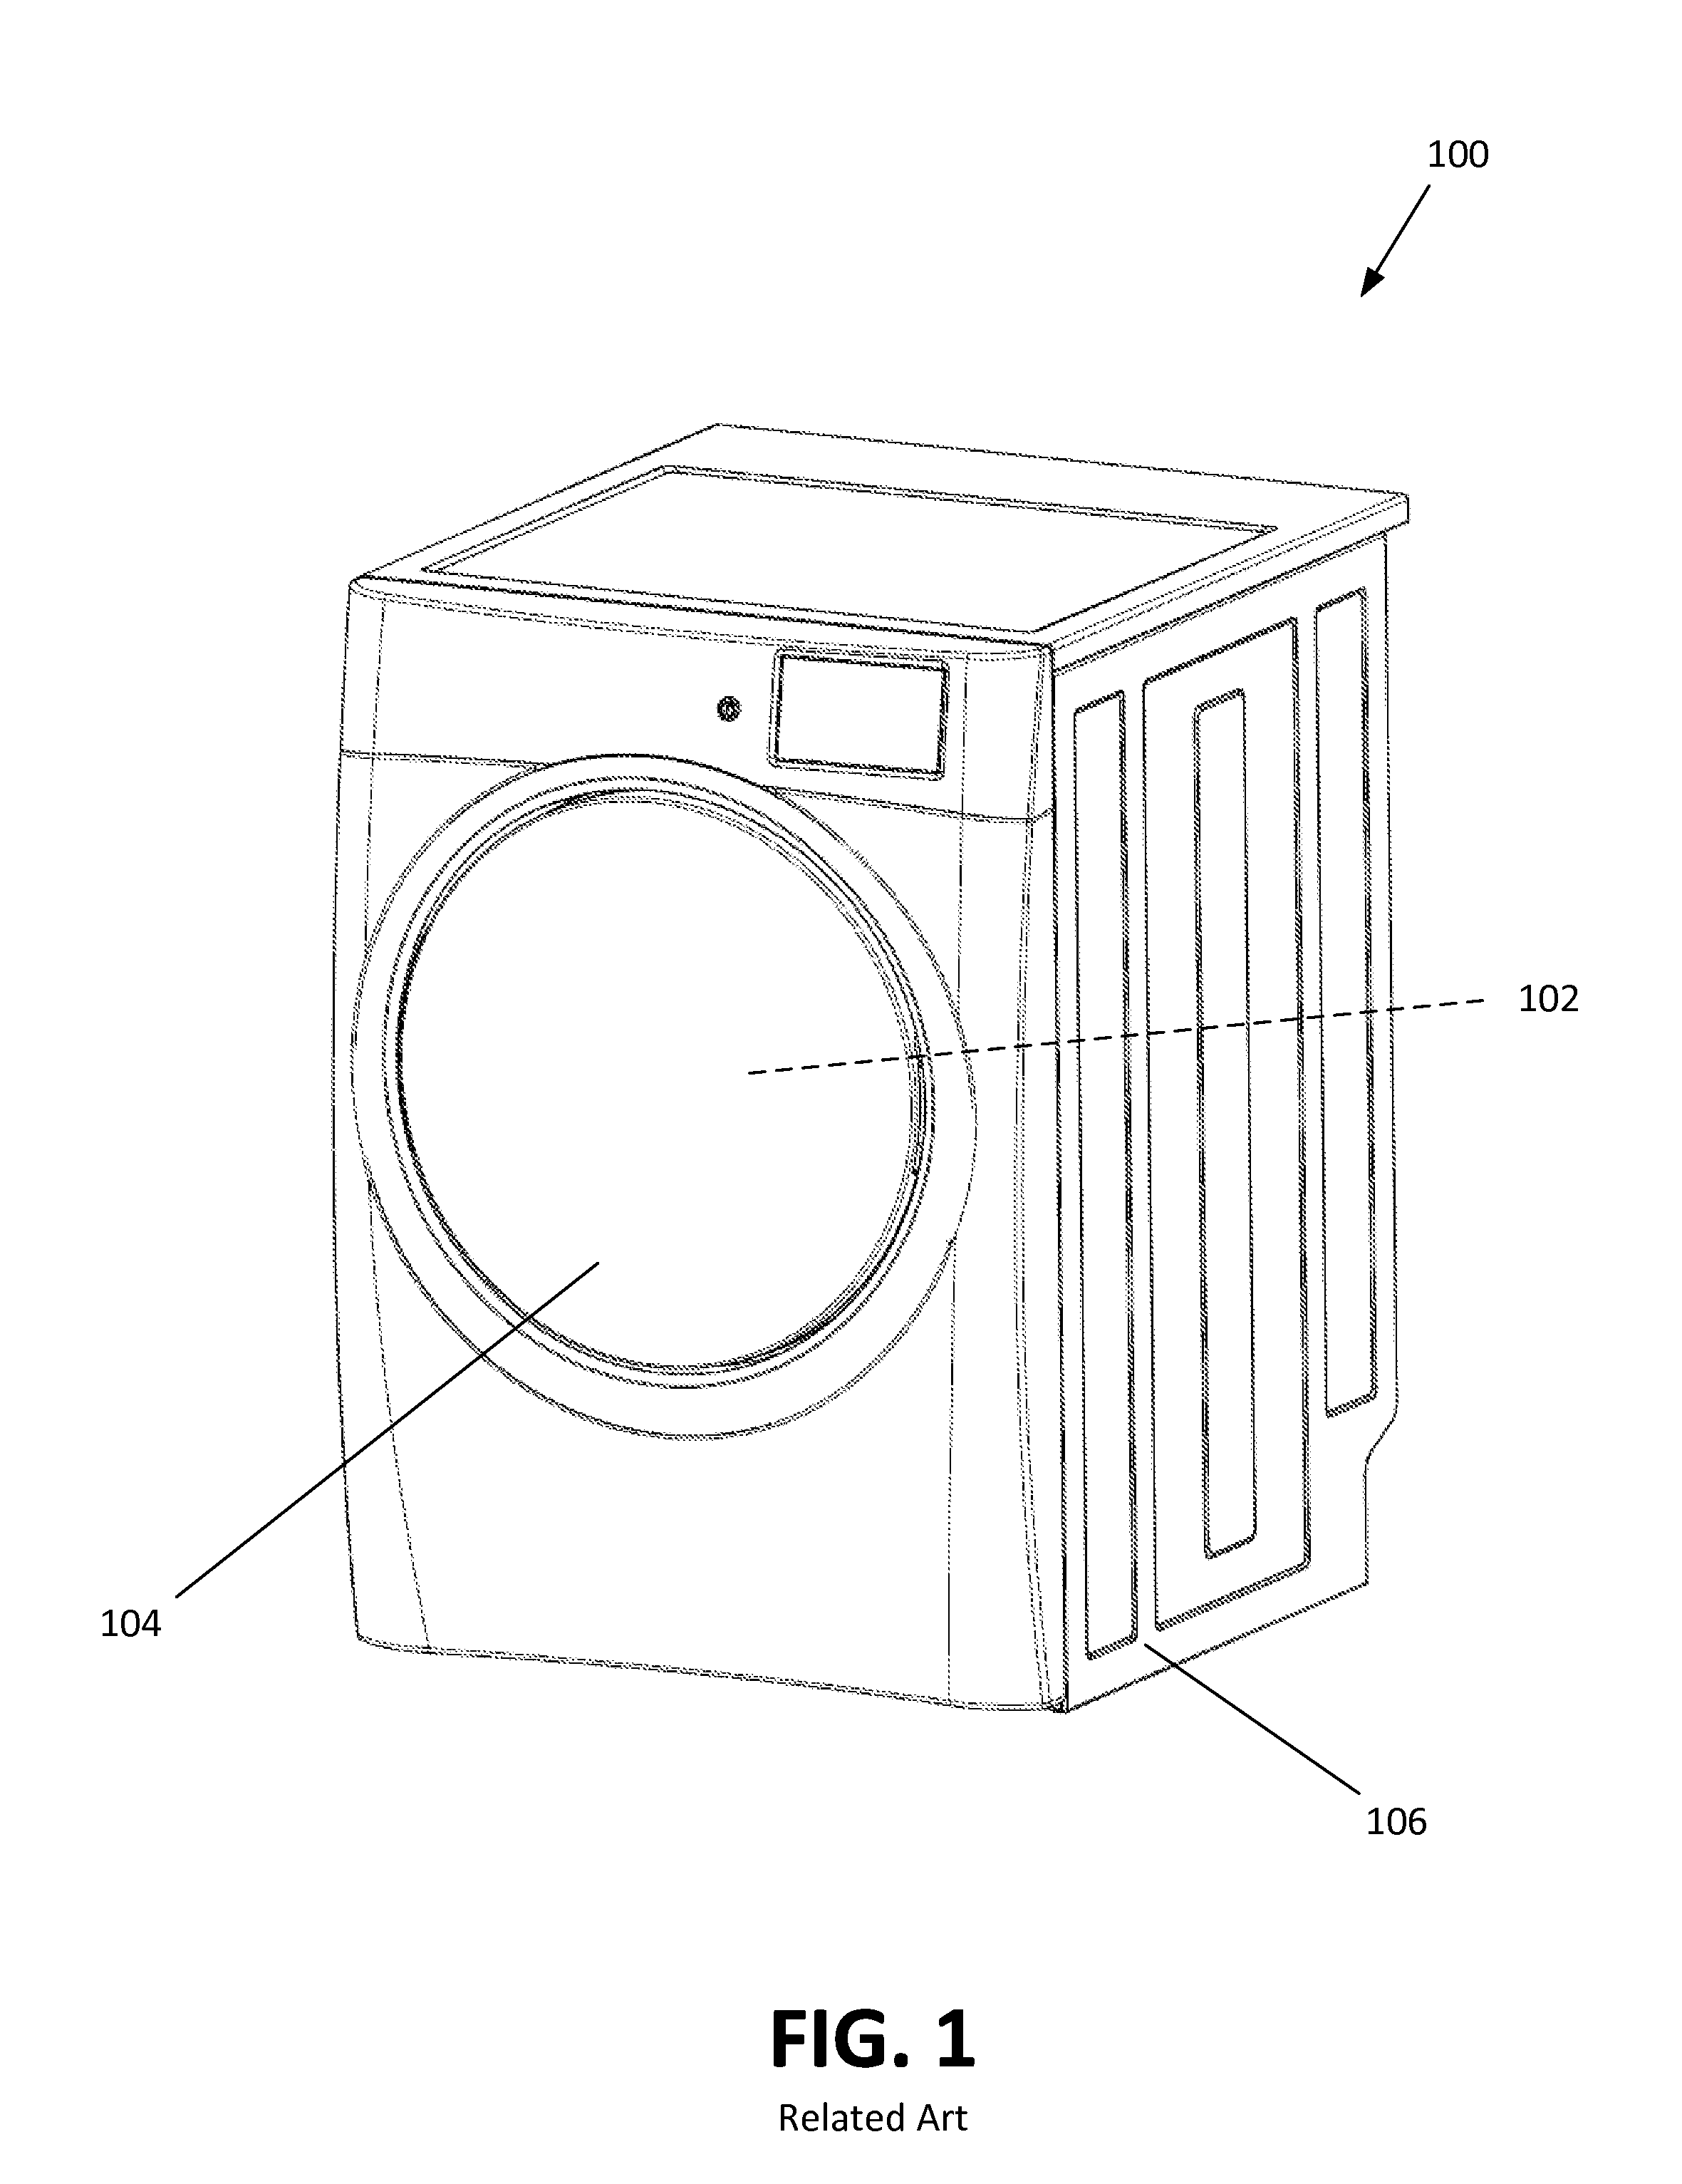 Laundry dryer with emergency closing ventilation system